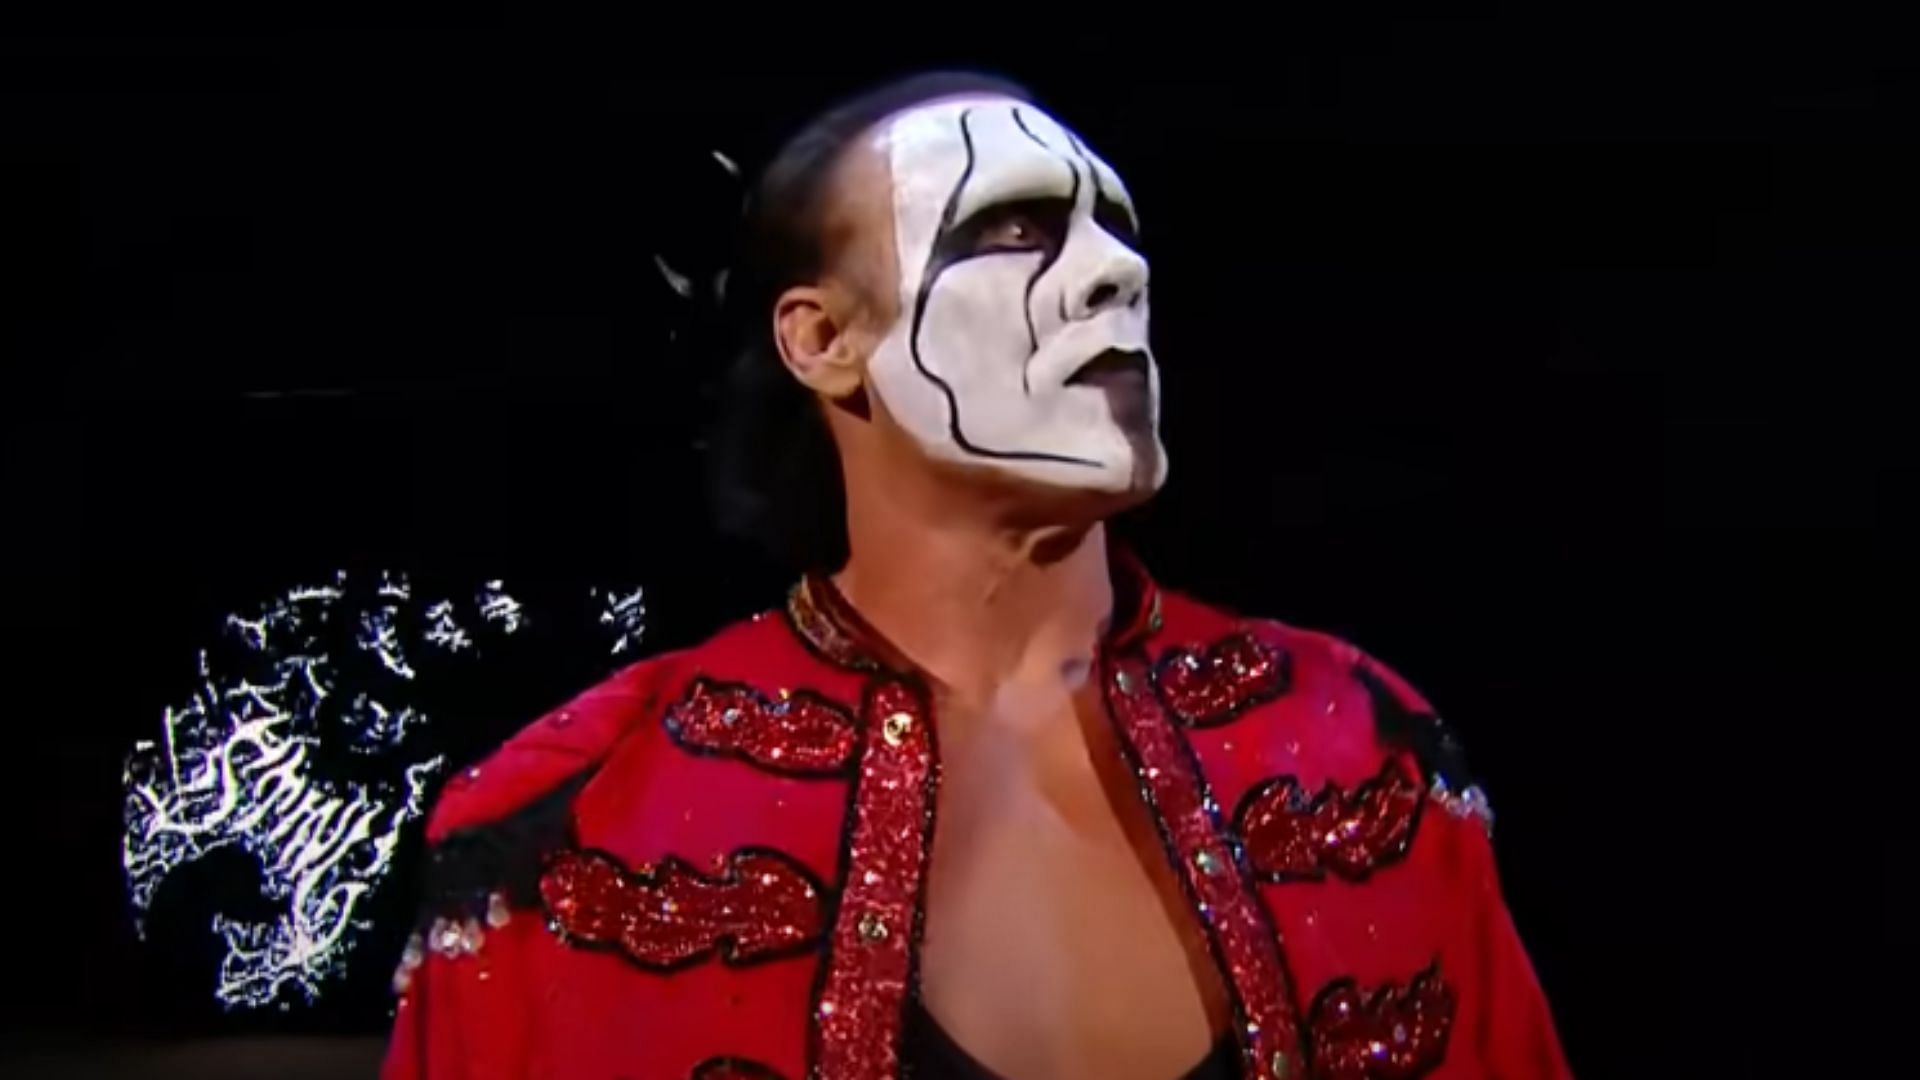 Sting has worked for several major companies, including WCW and WWE.